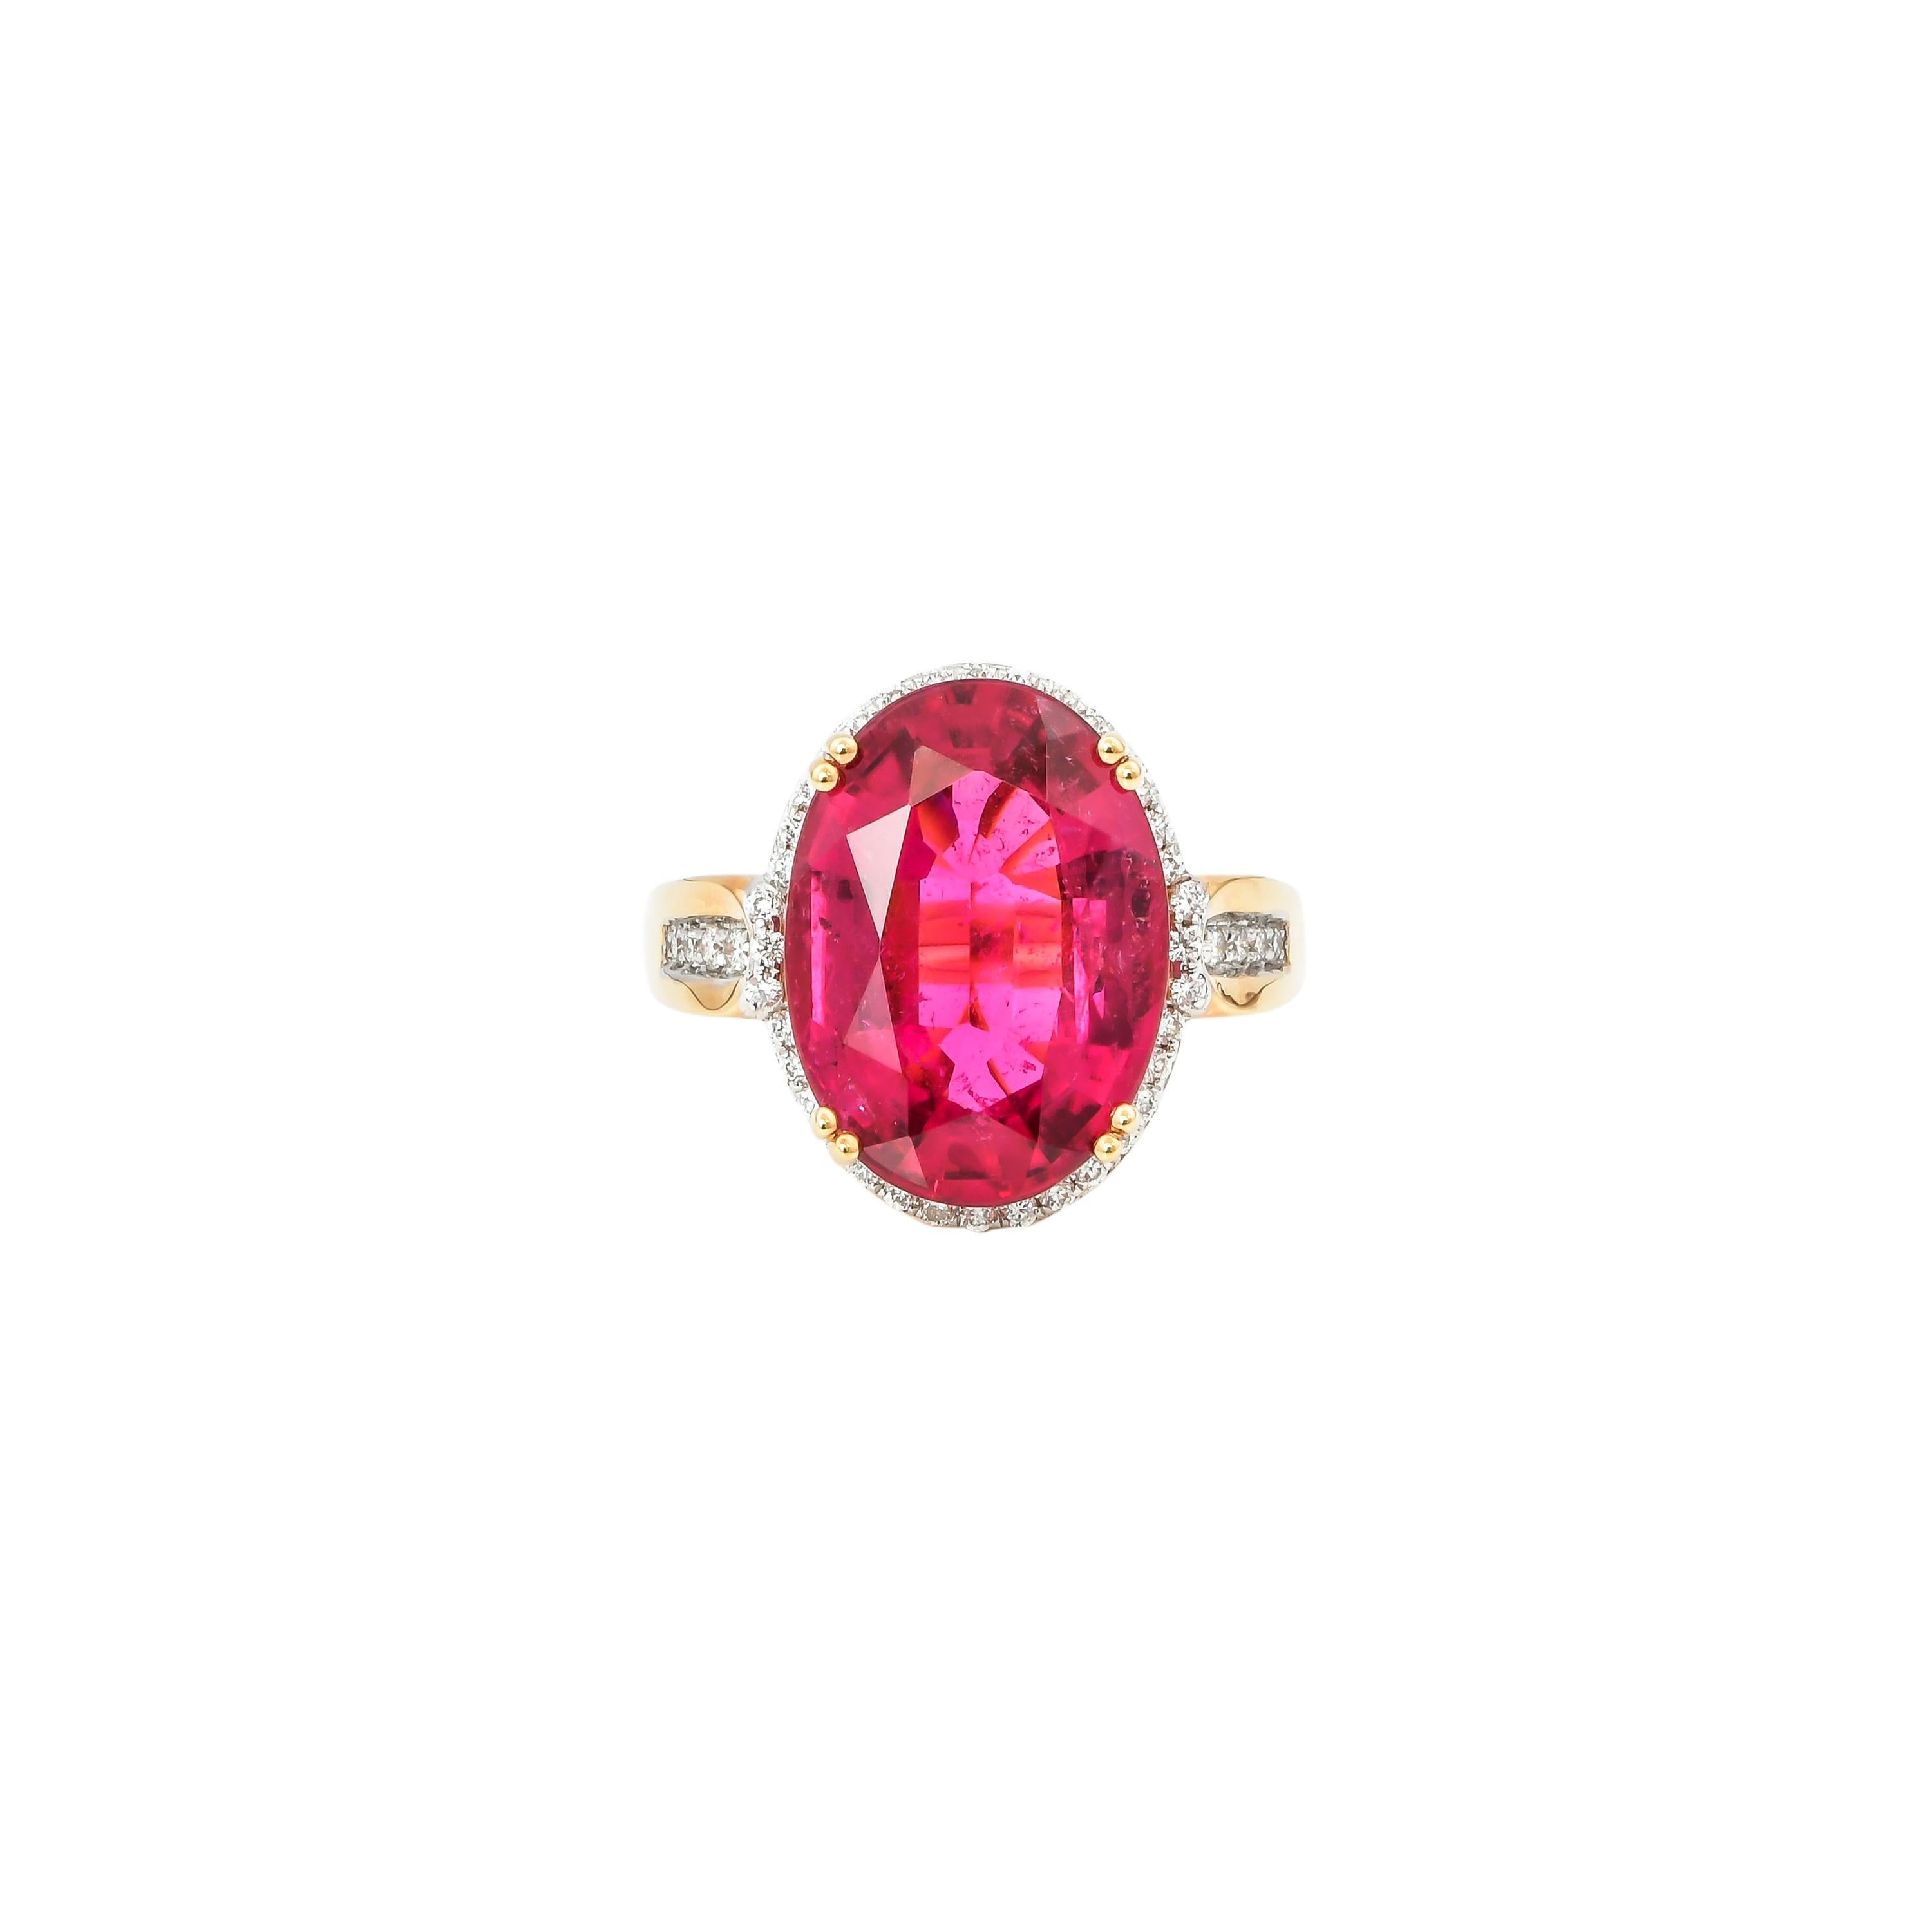 This collection of rings features the most radiant rubelites. These gemstones show a magnificant and regal deep red colour, and the yellow gold and diamond accents makes these pieces a true show stopper. 

Classic rubelite ring in 18K yellow gold